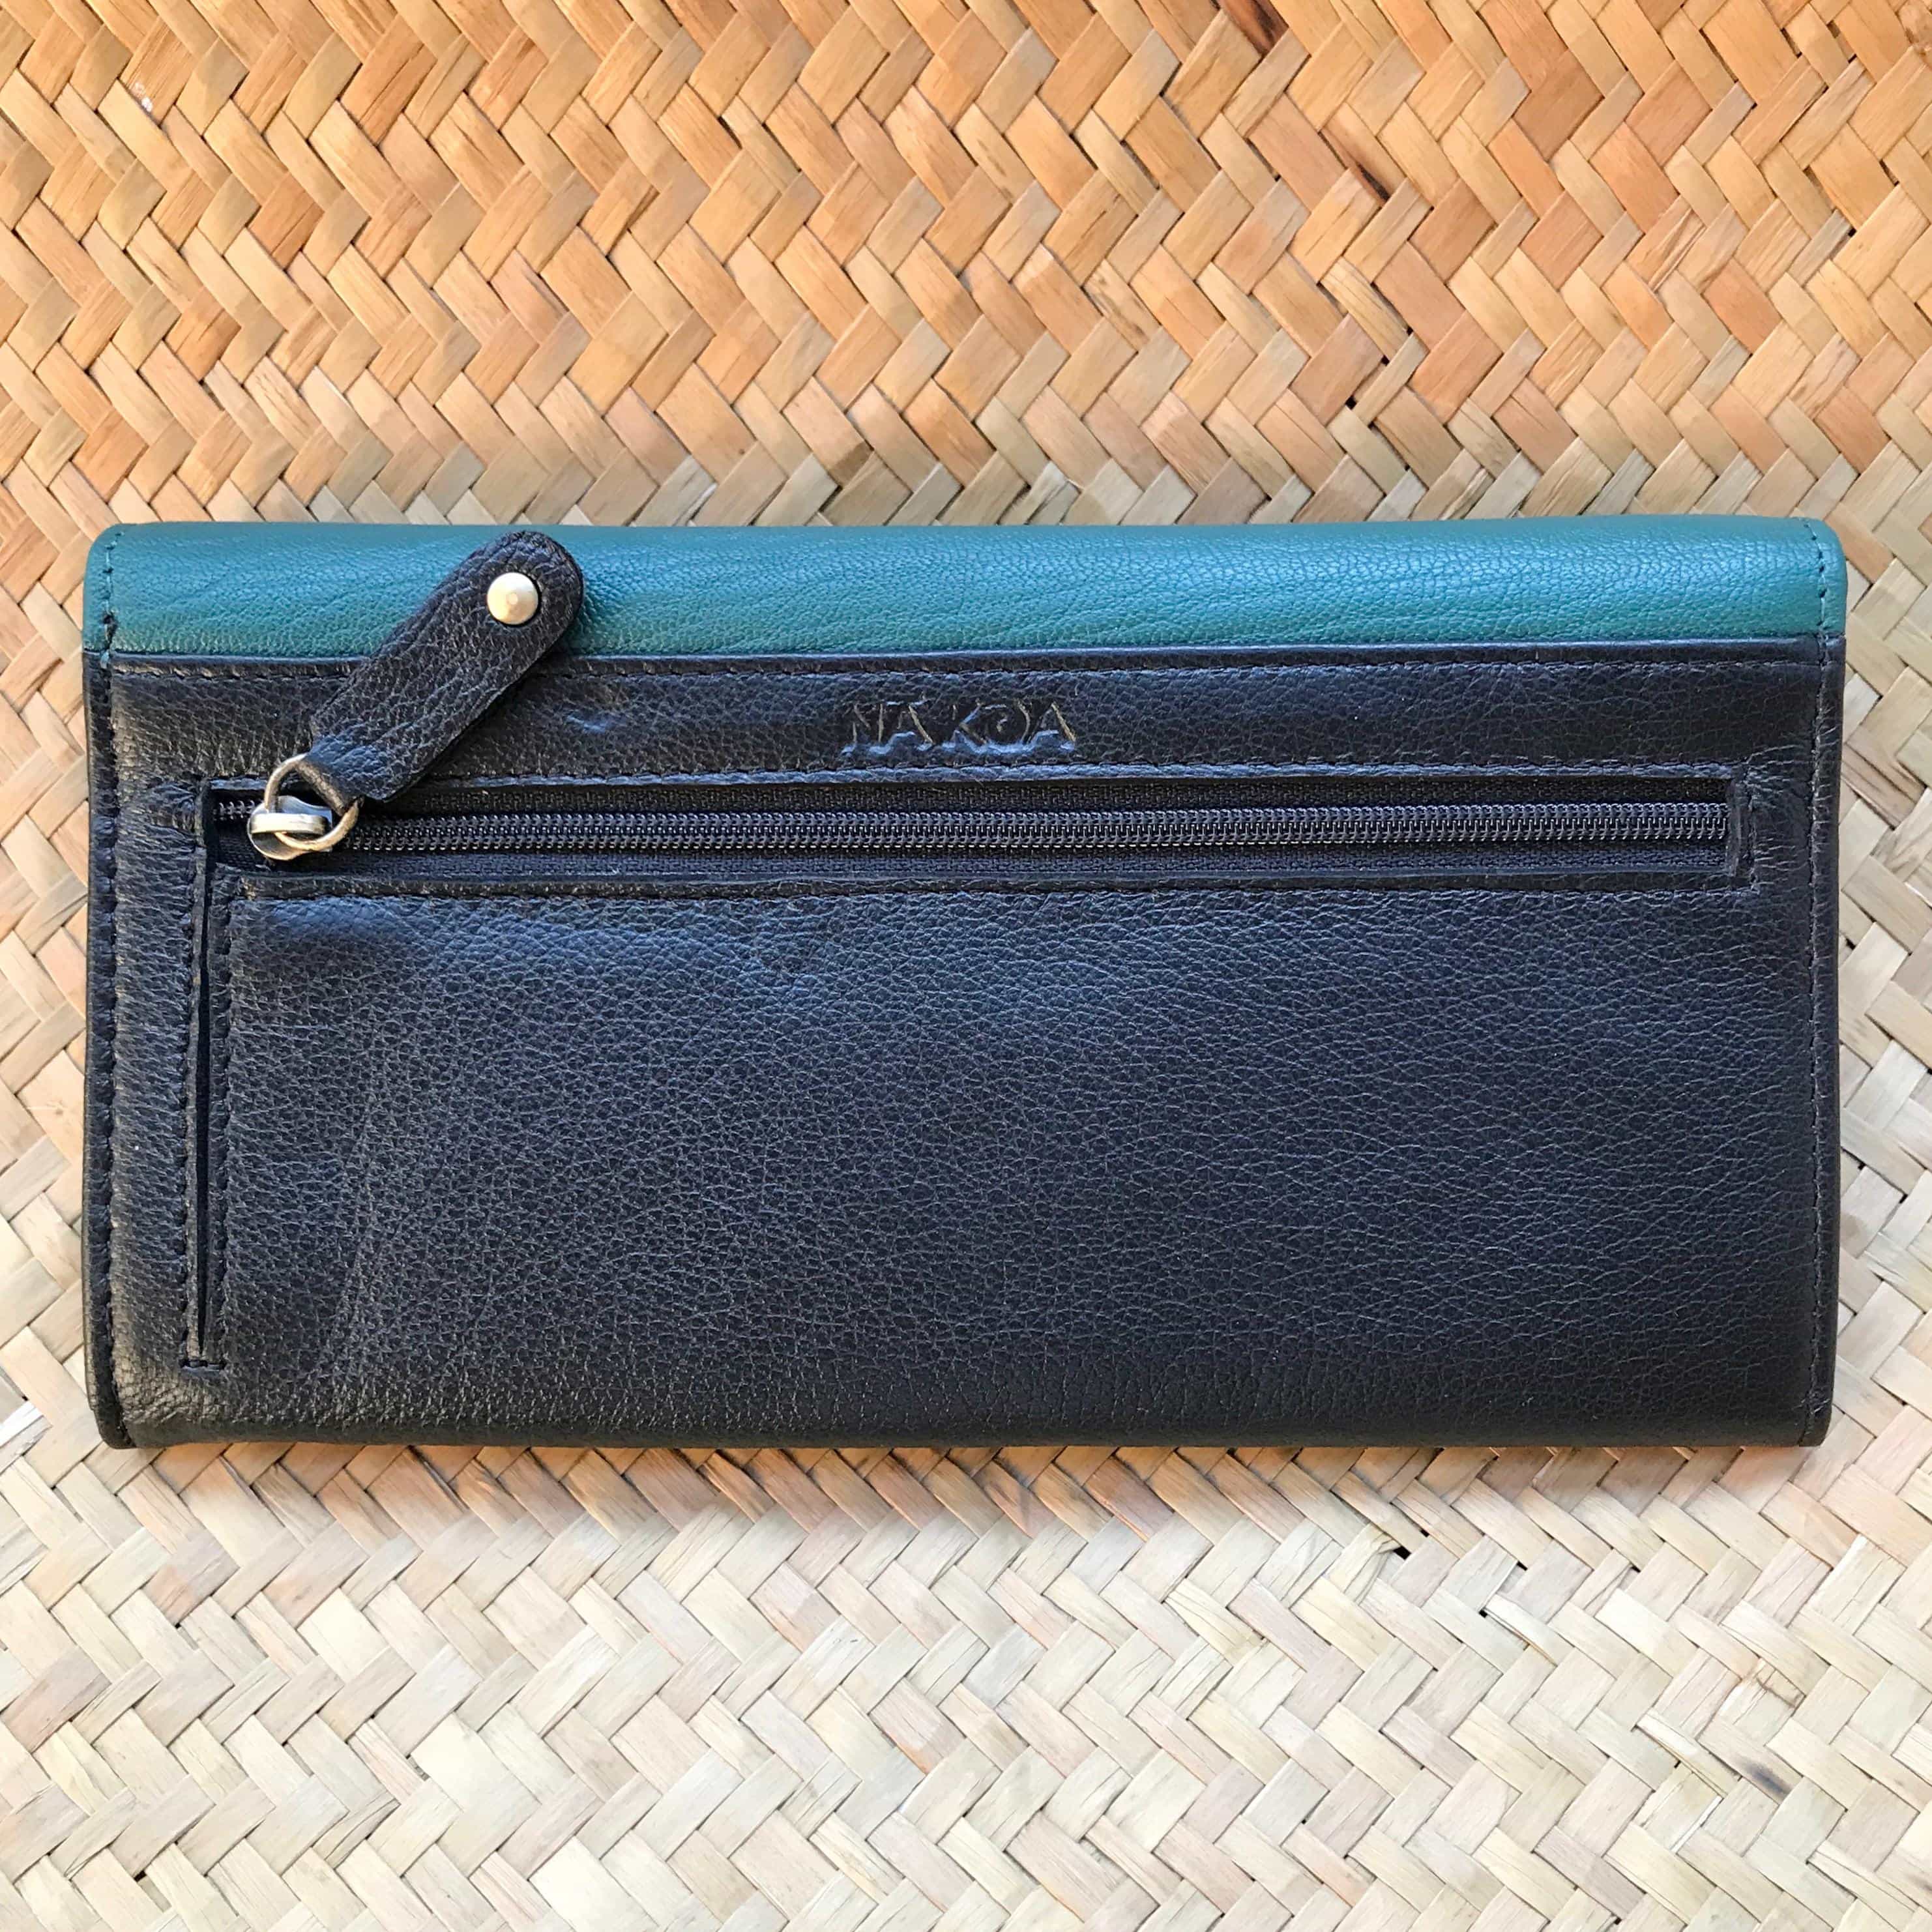 Back view of a green leather clutch wallet for women